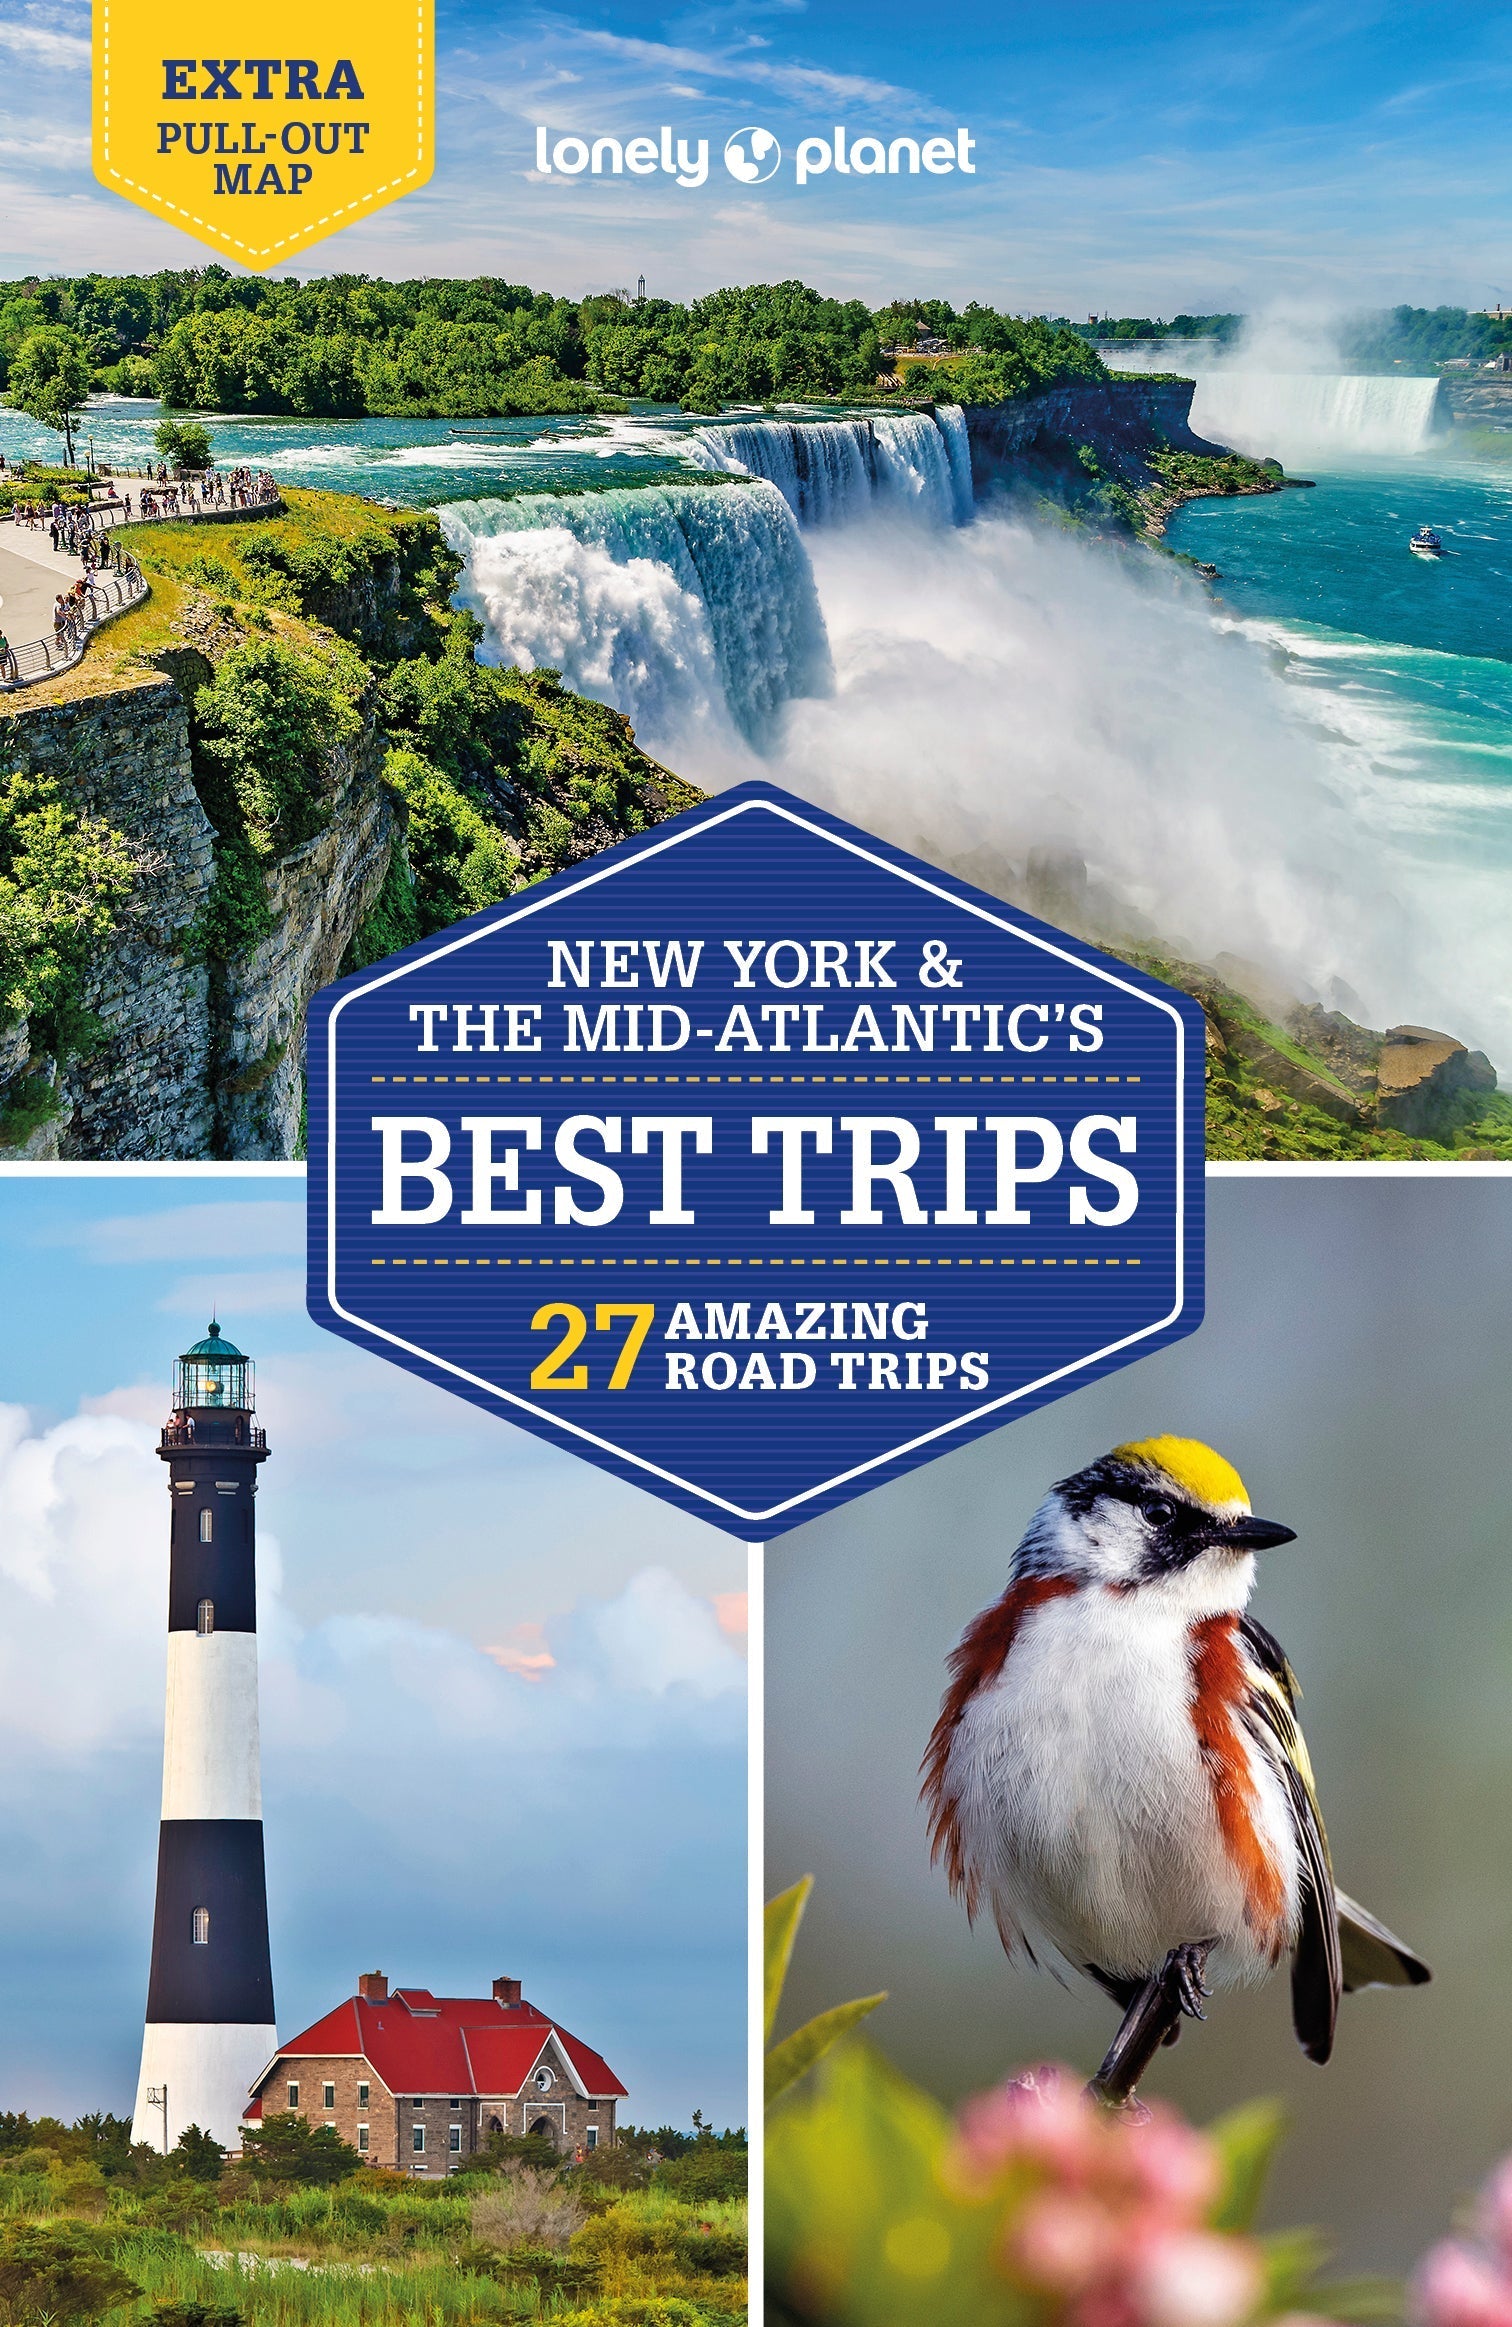 New York & the Mid-Atlantic's Best Trips preview